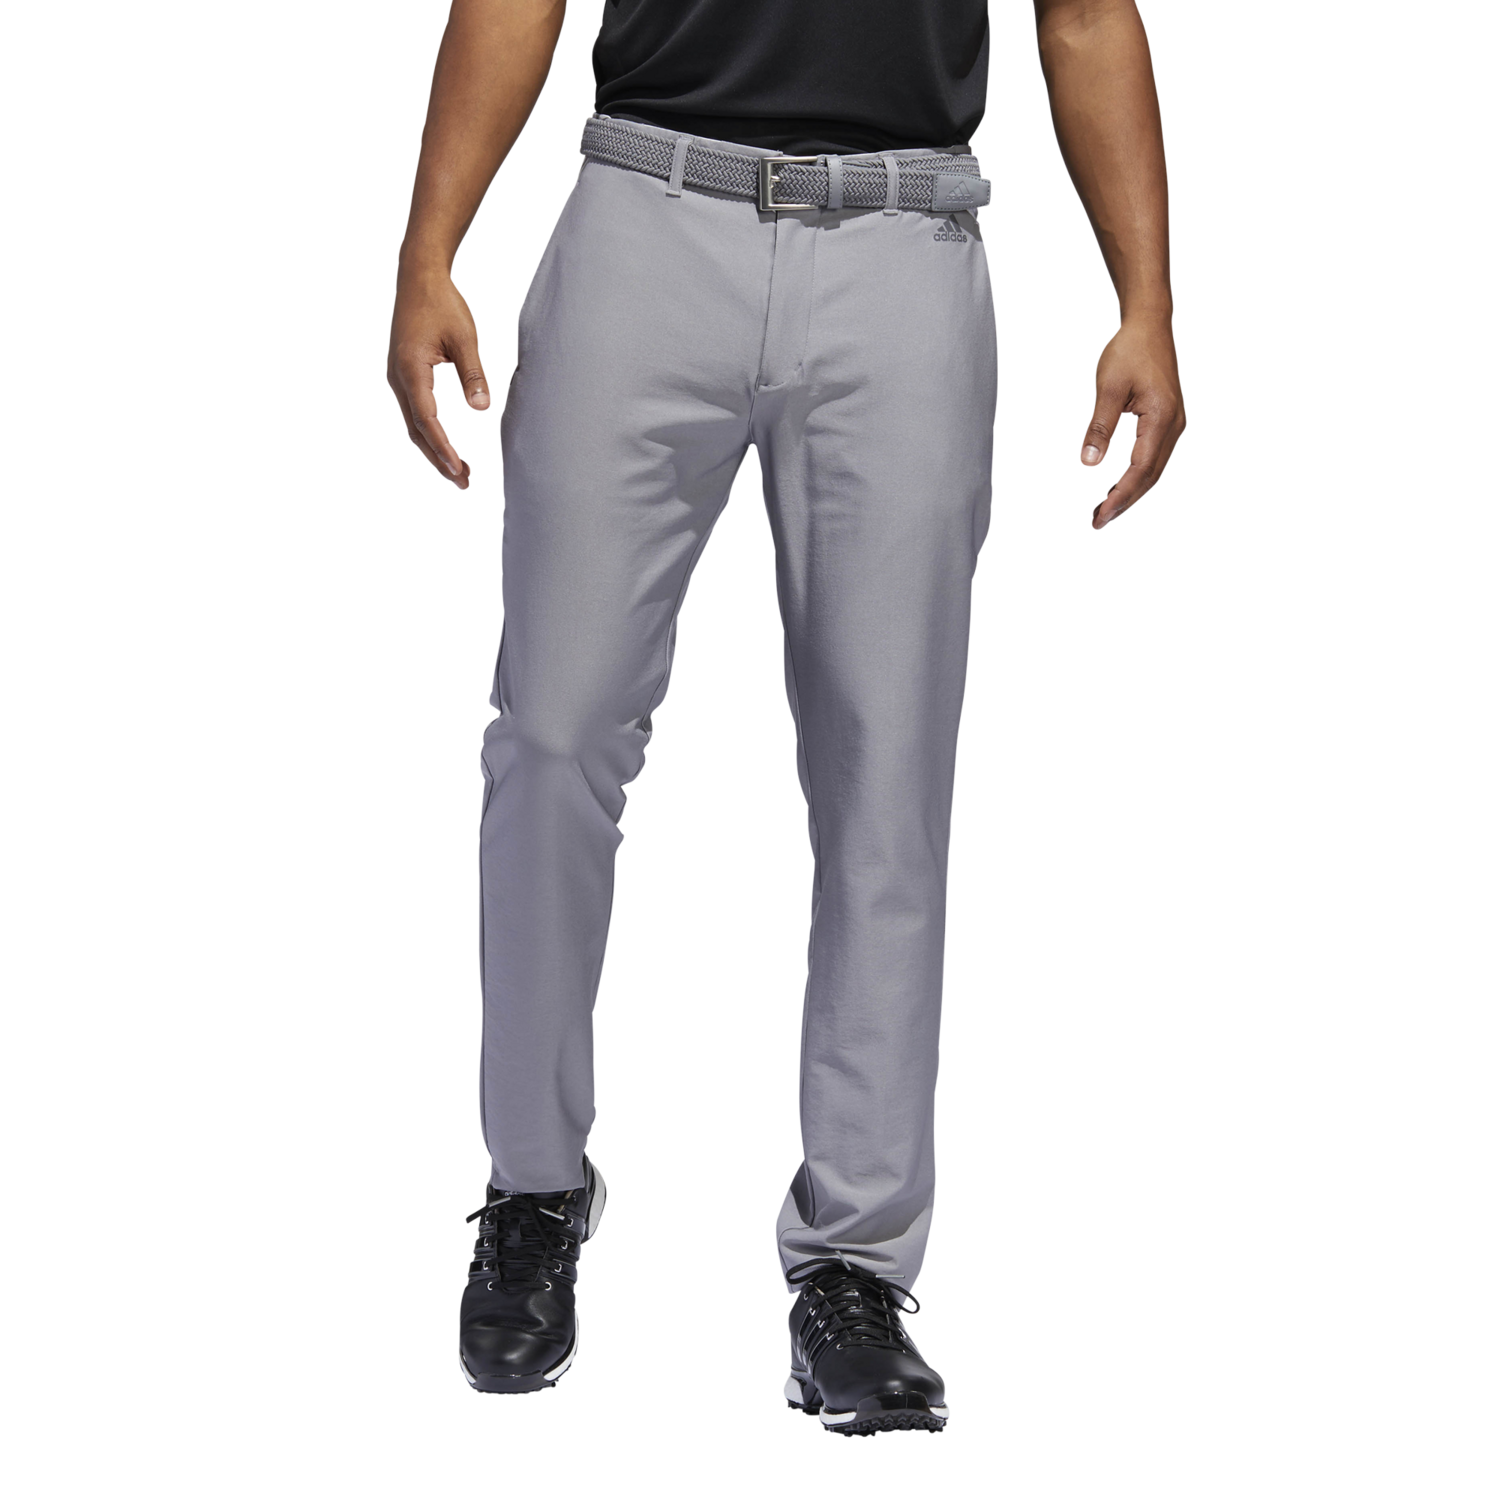 ULTIMATE365 3STRIPES TAPERED PANTS ADIDAS ULTIMATE365 3STRIPES TAPERED  GOLF PANTS Adidas Golf 2019 Ultimate 365 3Stripes Tapered Golf Pants